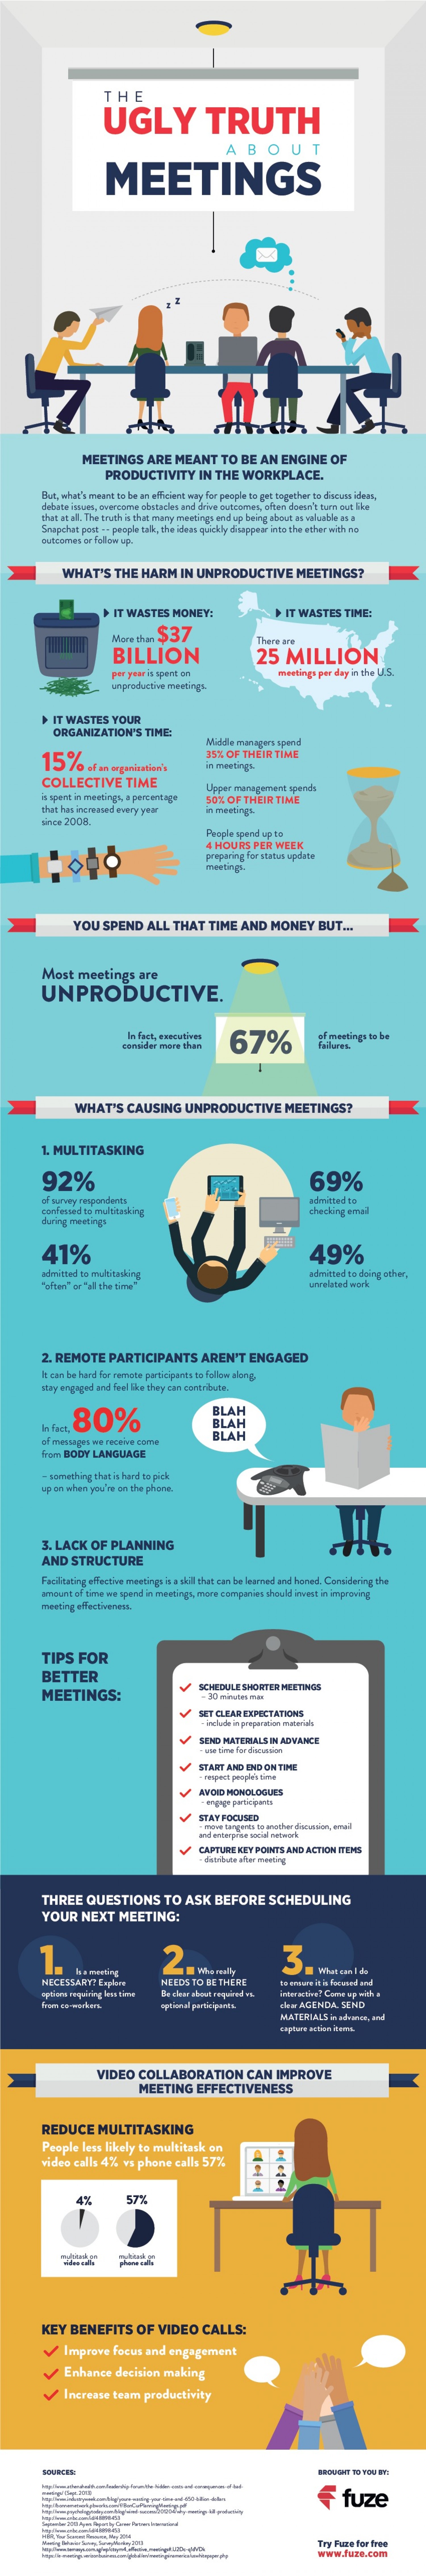 the-ugly-truth-about-meetings_538ca71ea5358_w1500